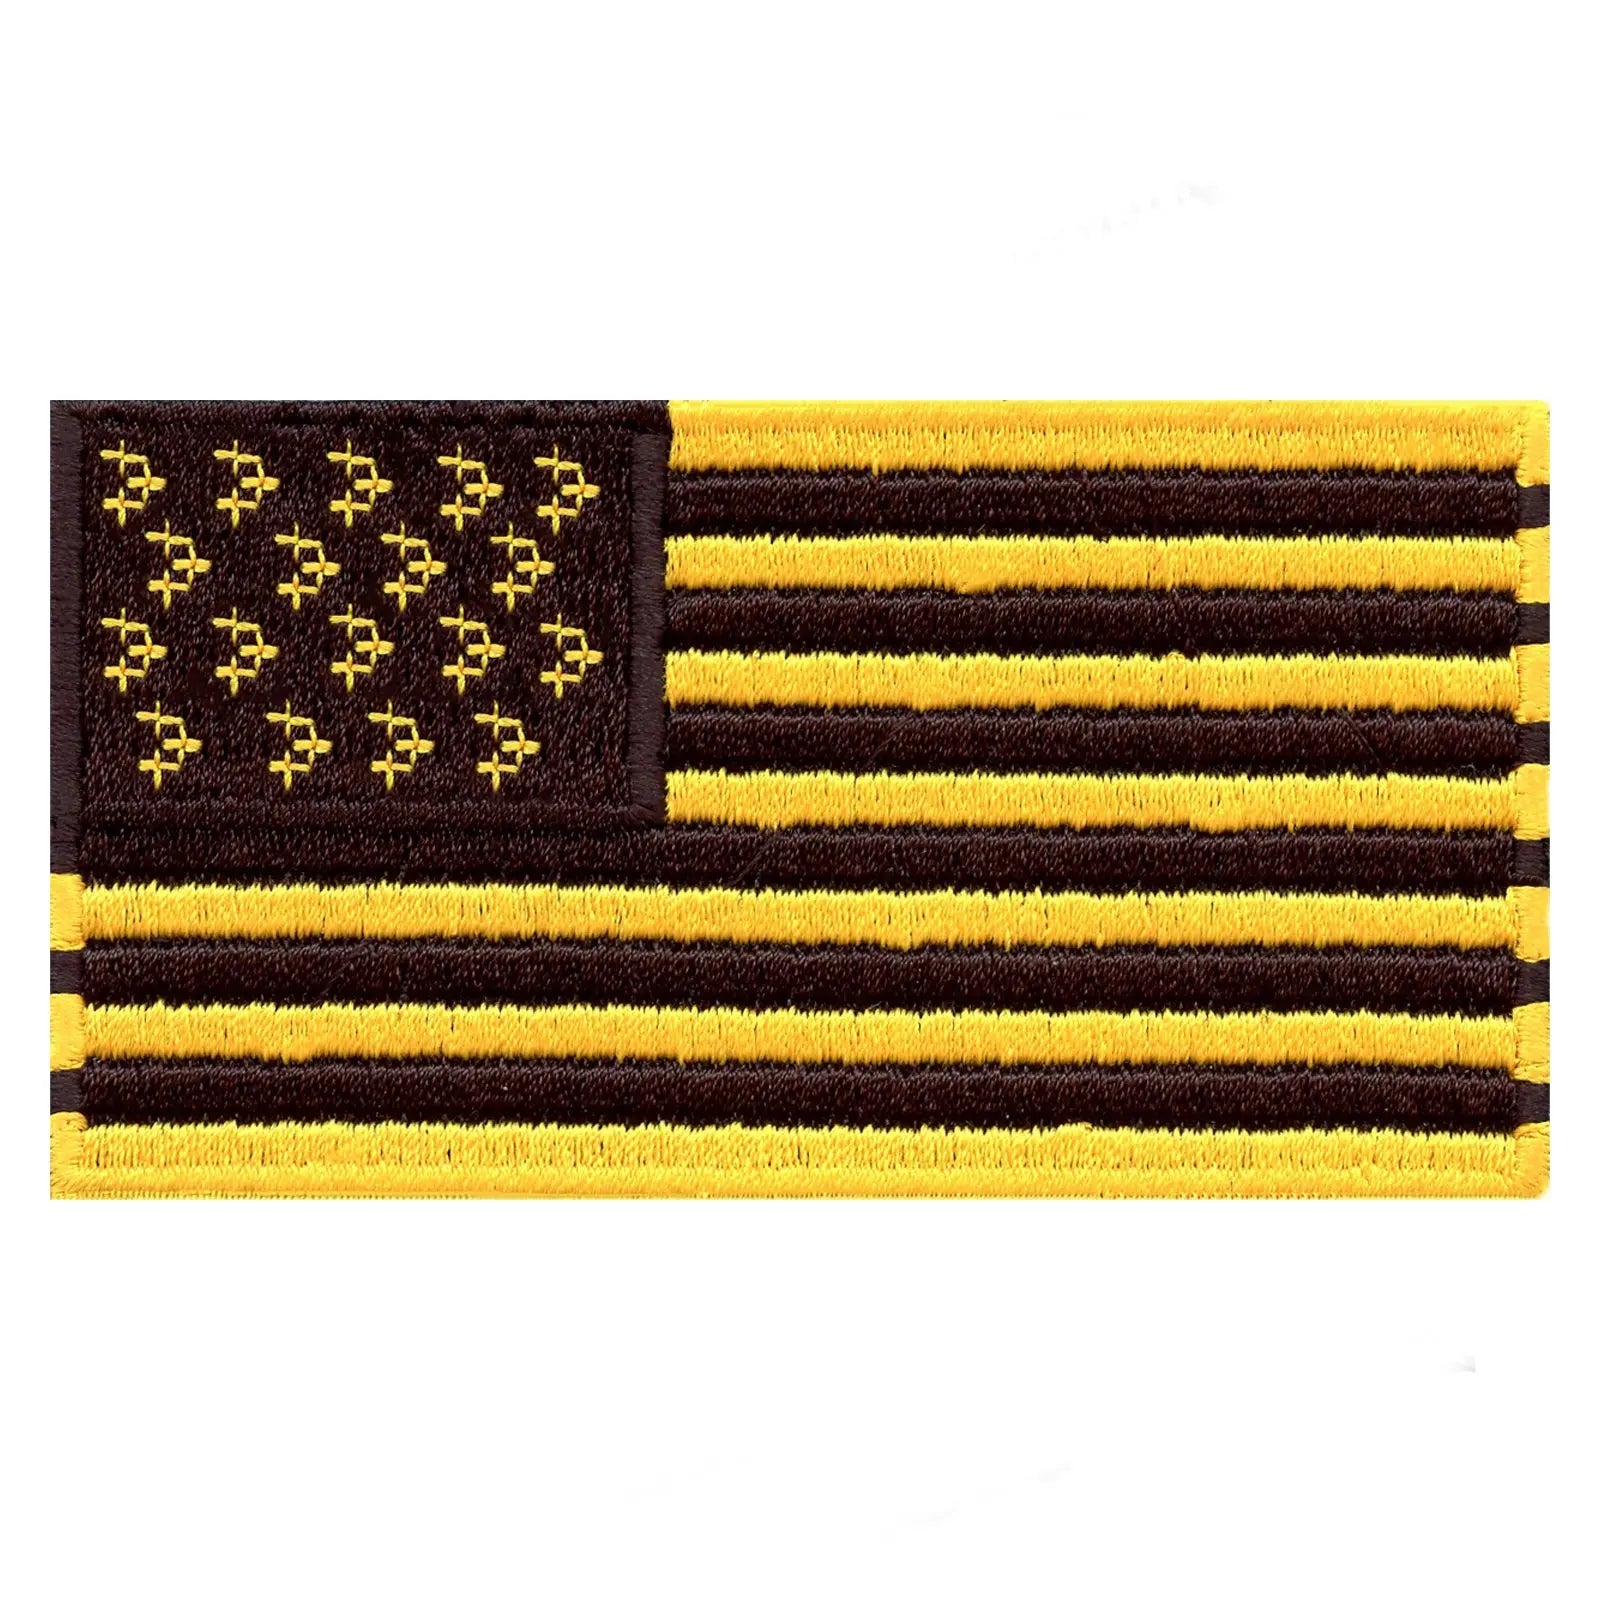 USA Flag Pittsburgh Black & Yellow Football Parody Embroidered Iron On Patch 